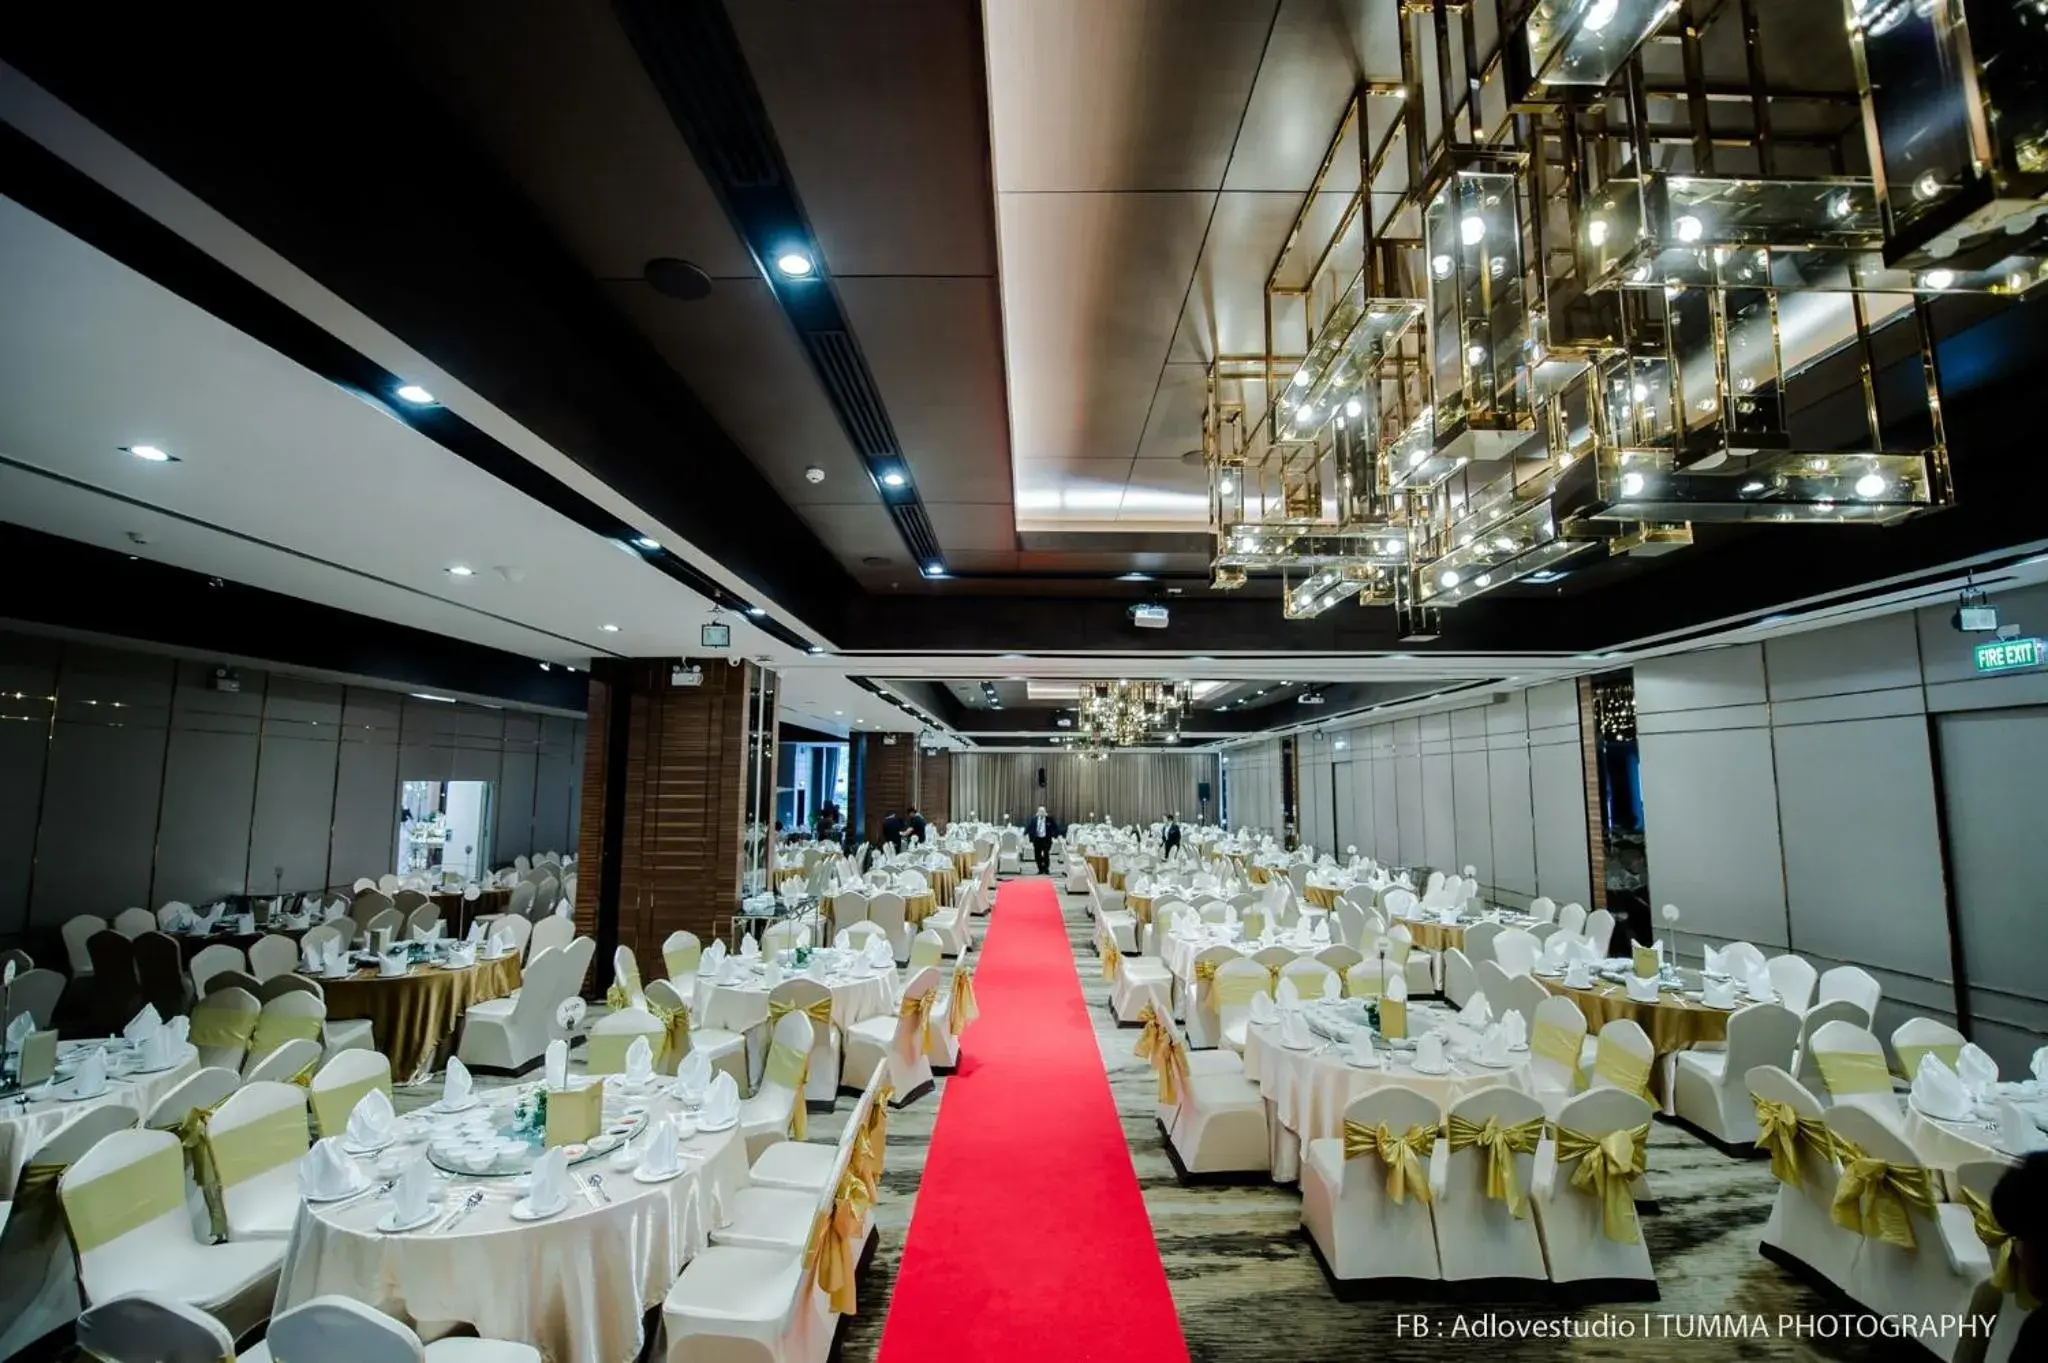 Banquet Facilities in The Four Wings Hotel Bangkok